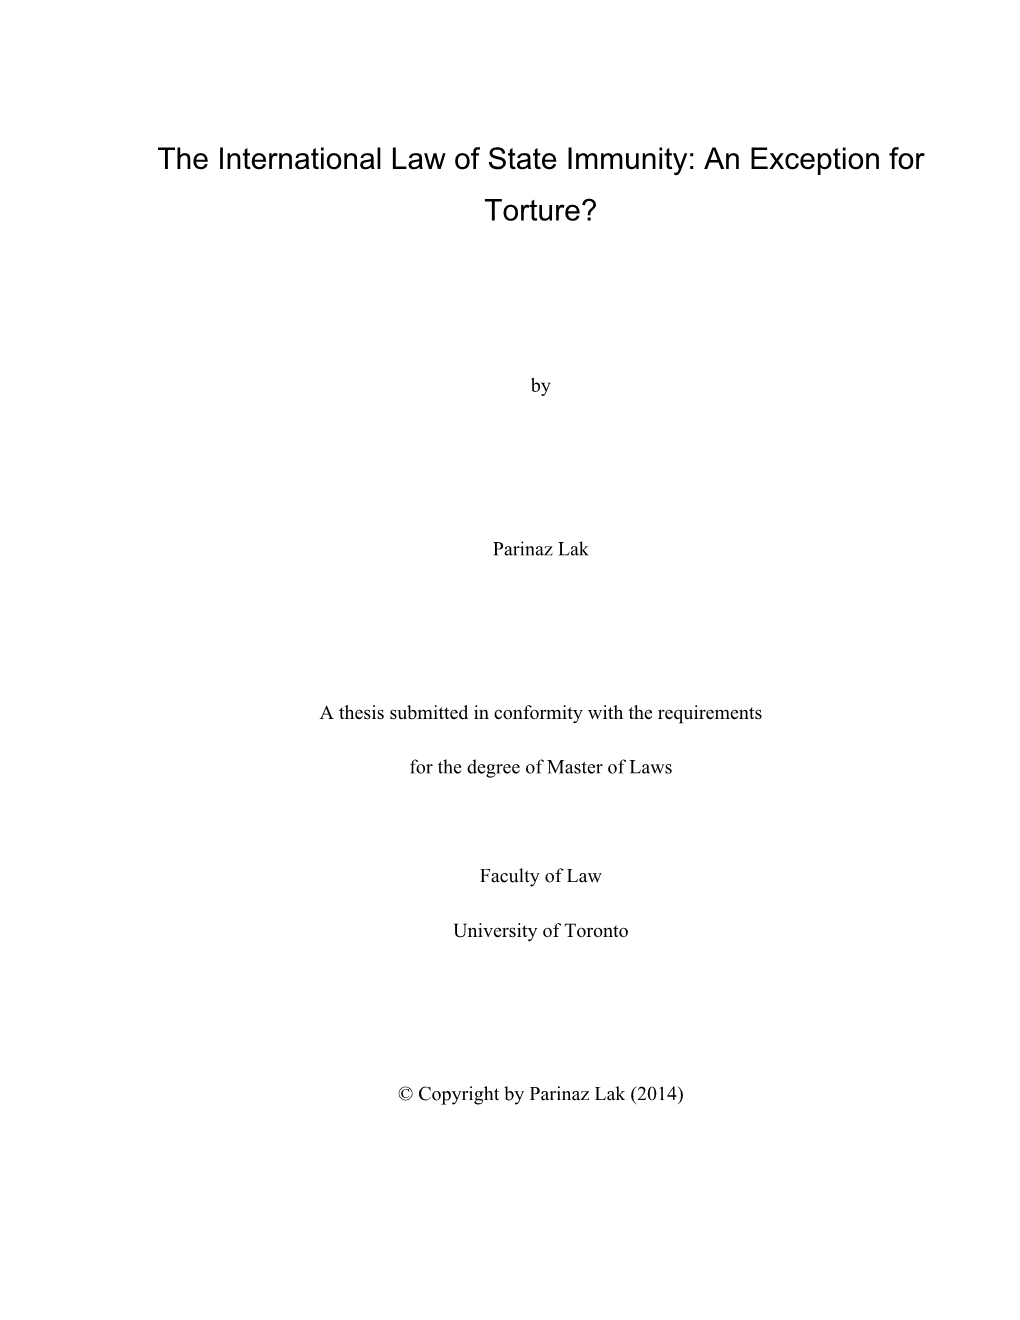 The International Law of State Immunity: an Exception for Torture?